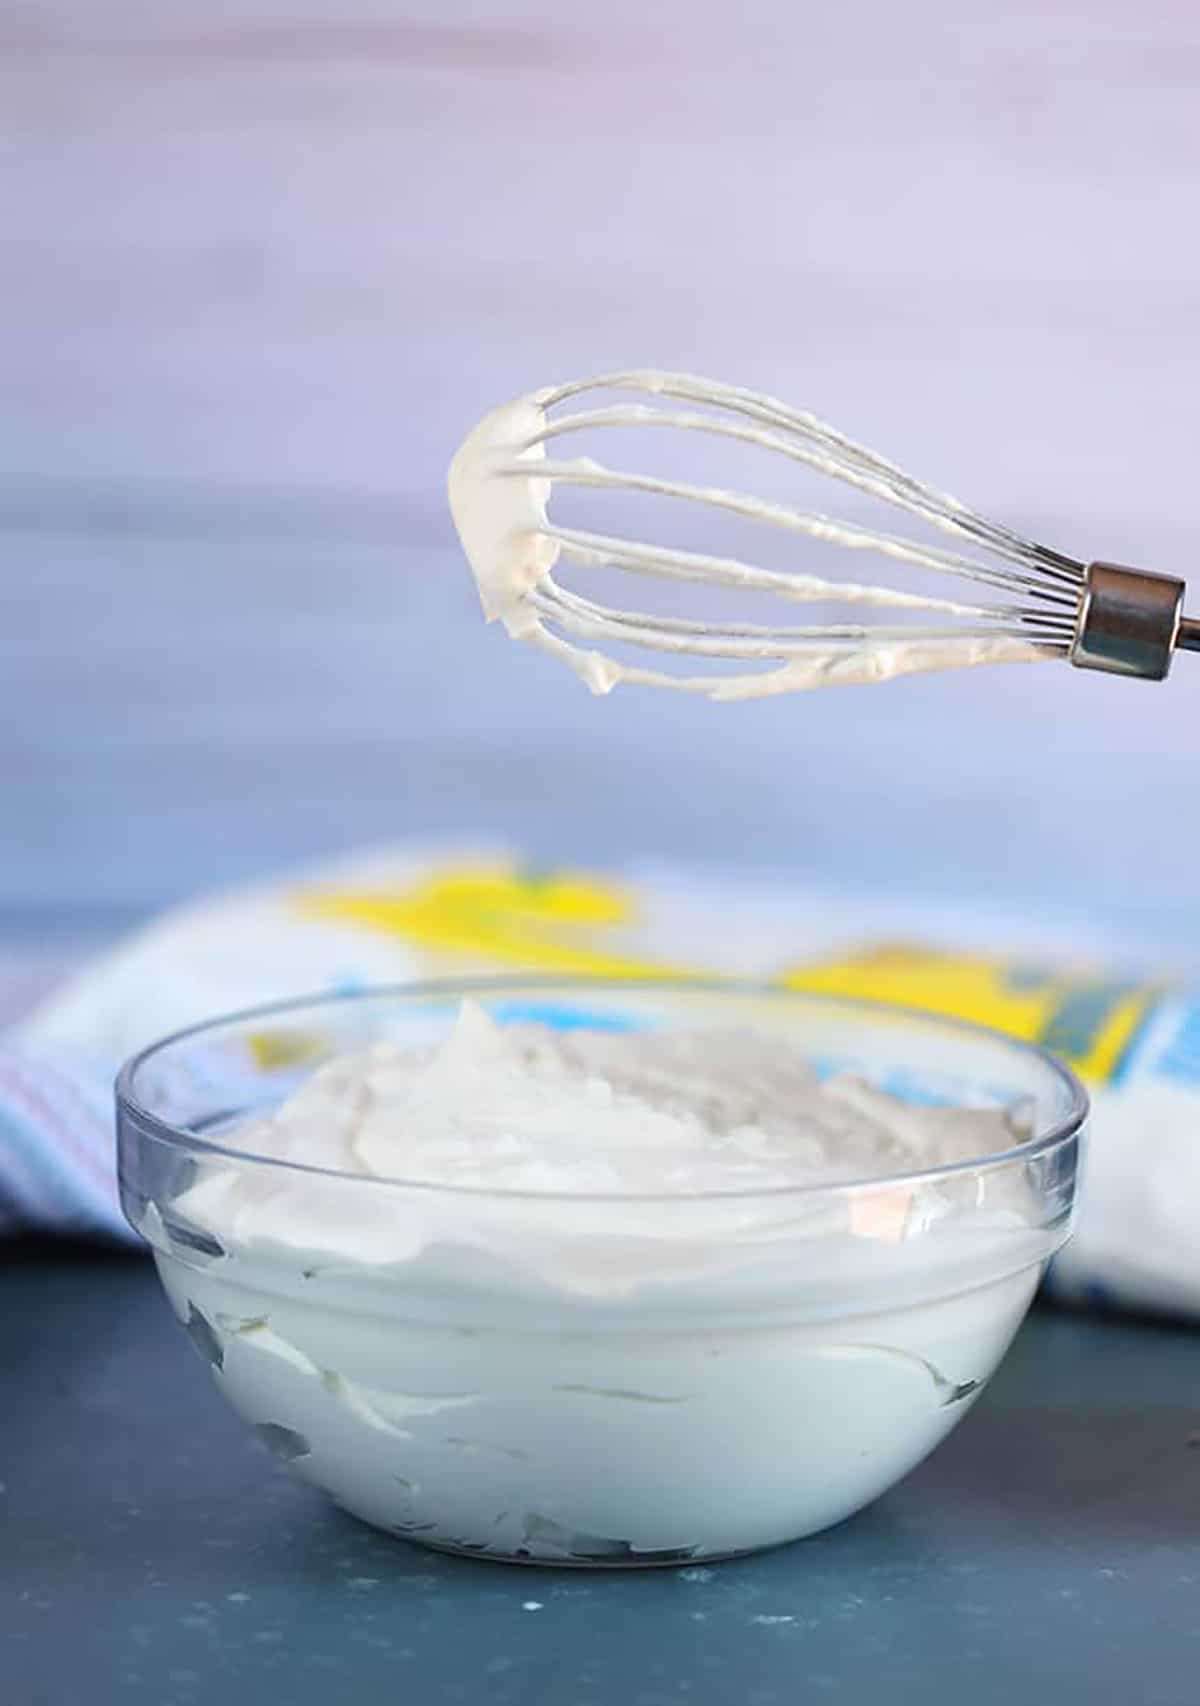 Whisk over a bowl of whipped cream in a glass bowl.